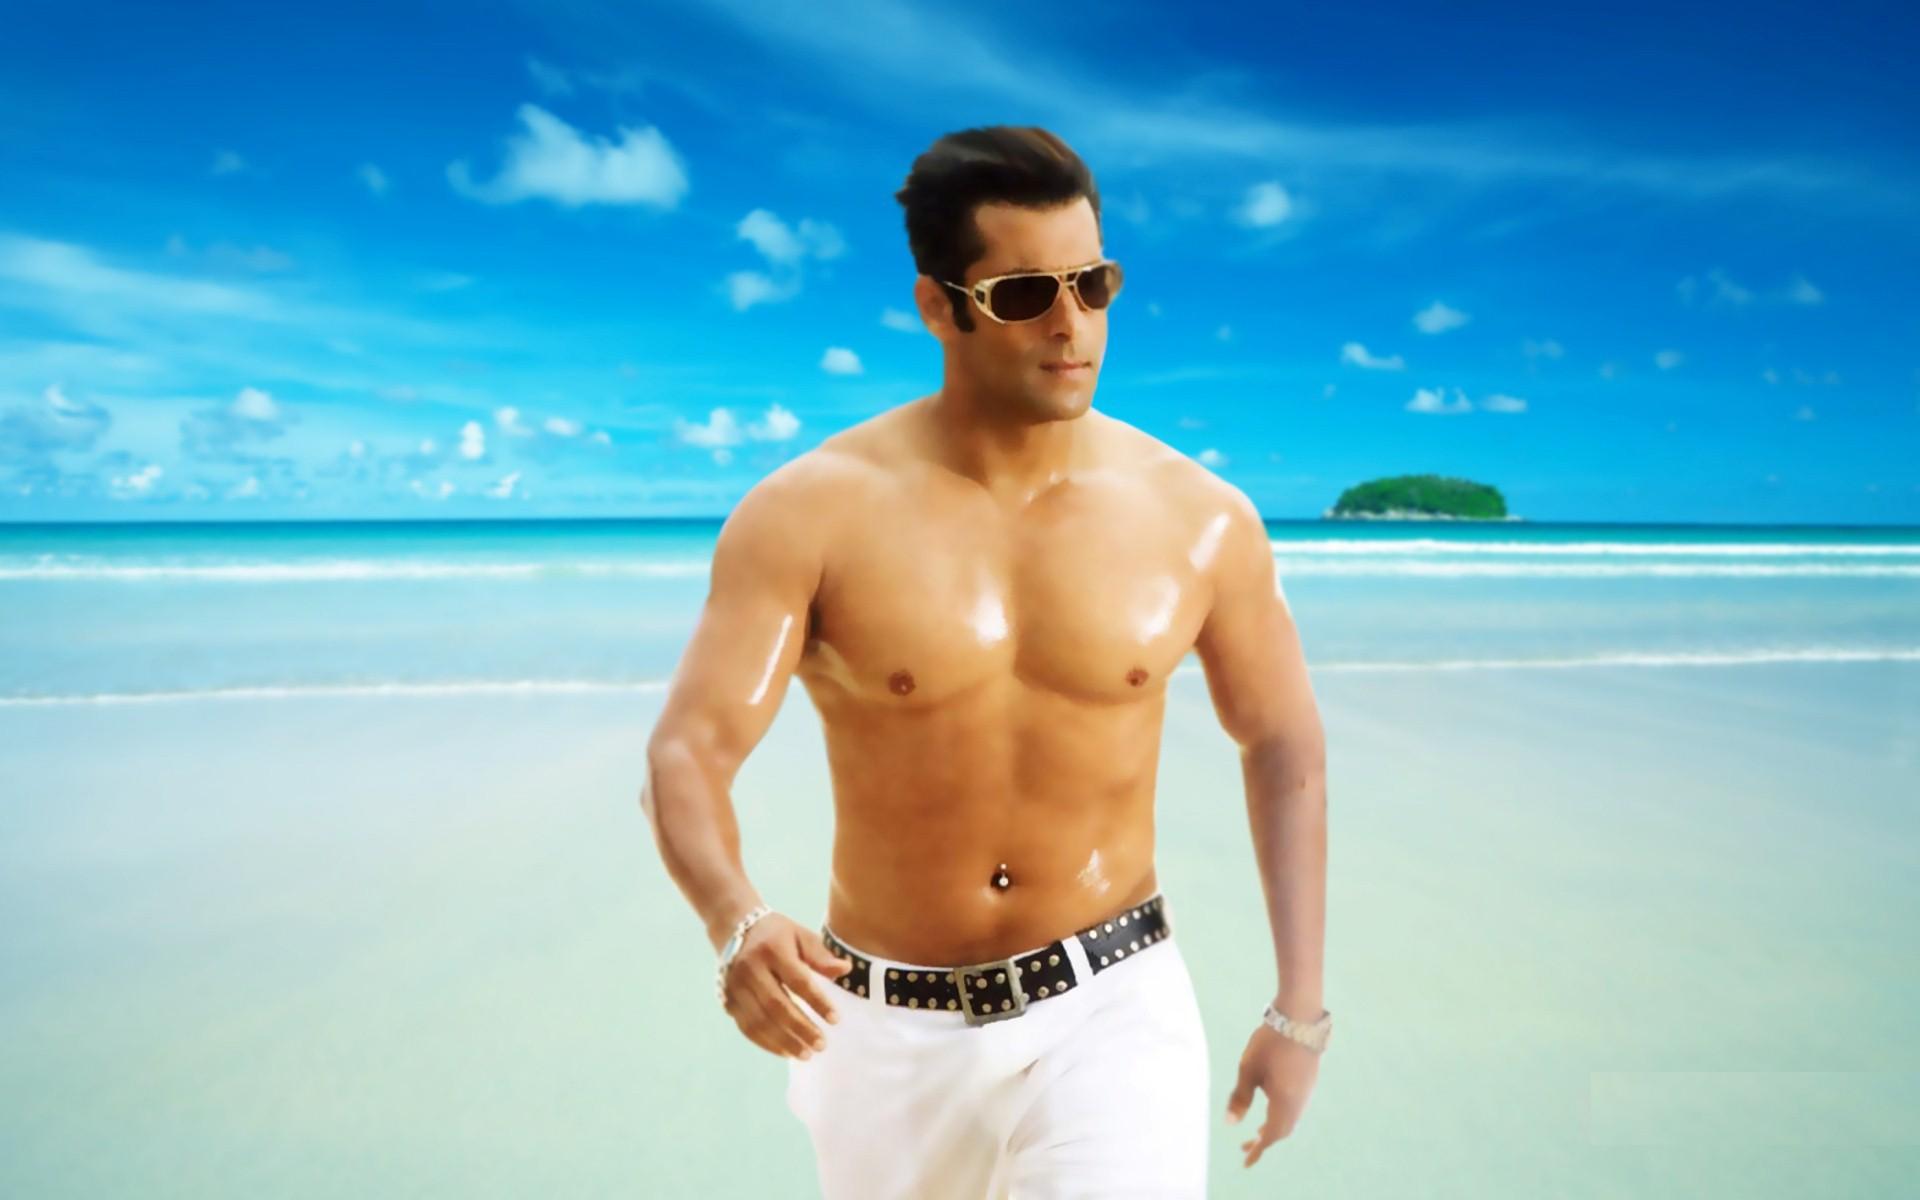 Download 1920x1200 Bollywood Actor 6 Pack Body of Salman